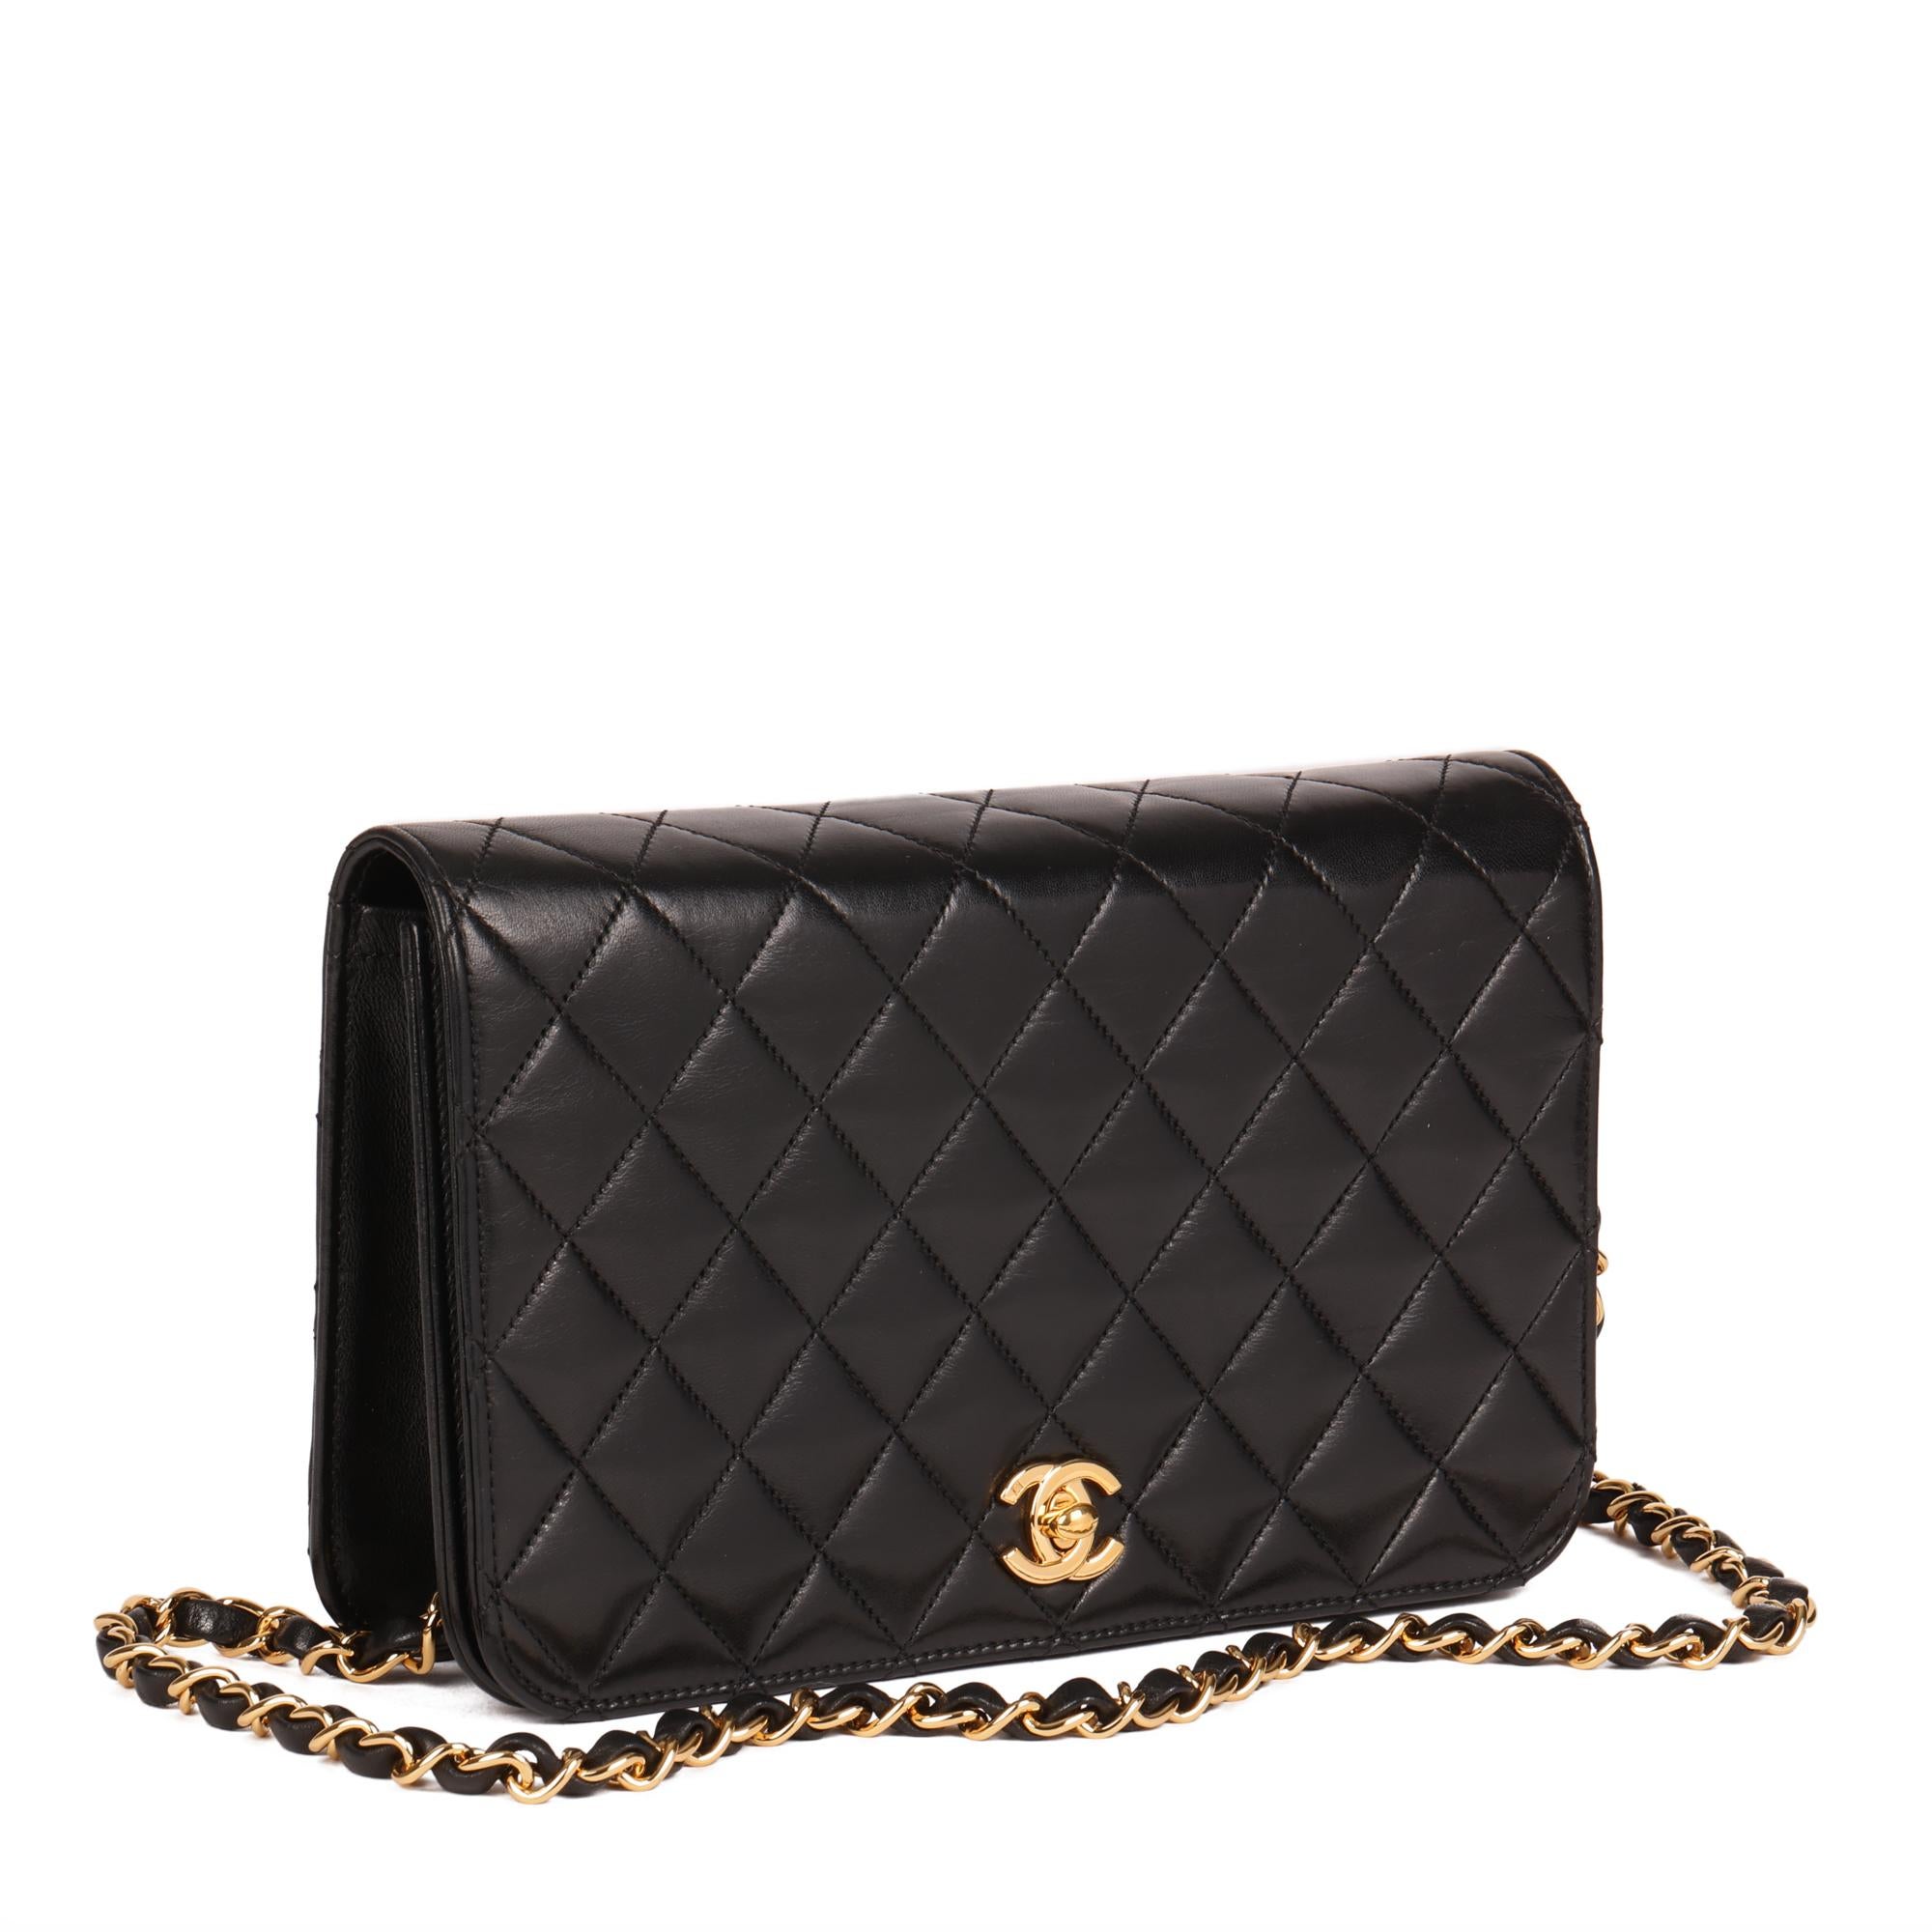 CHANEL
Black Quilted Lambskin Vintage Classic Single Full Flap Bag 

Serial Number: 11149255
Age (Circa): 2006
Accompanied By: Chanel Dust Bag, Authenticity Card 
Authenticity Details: Authenticity Card, Serial Sticker (Made in France)
Gender: